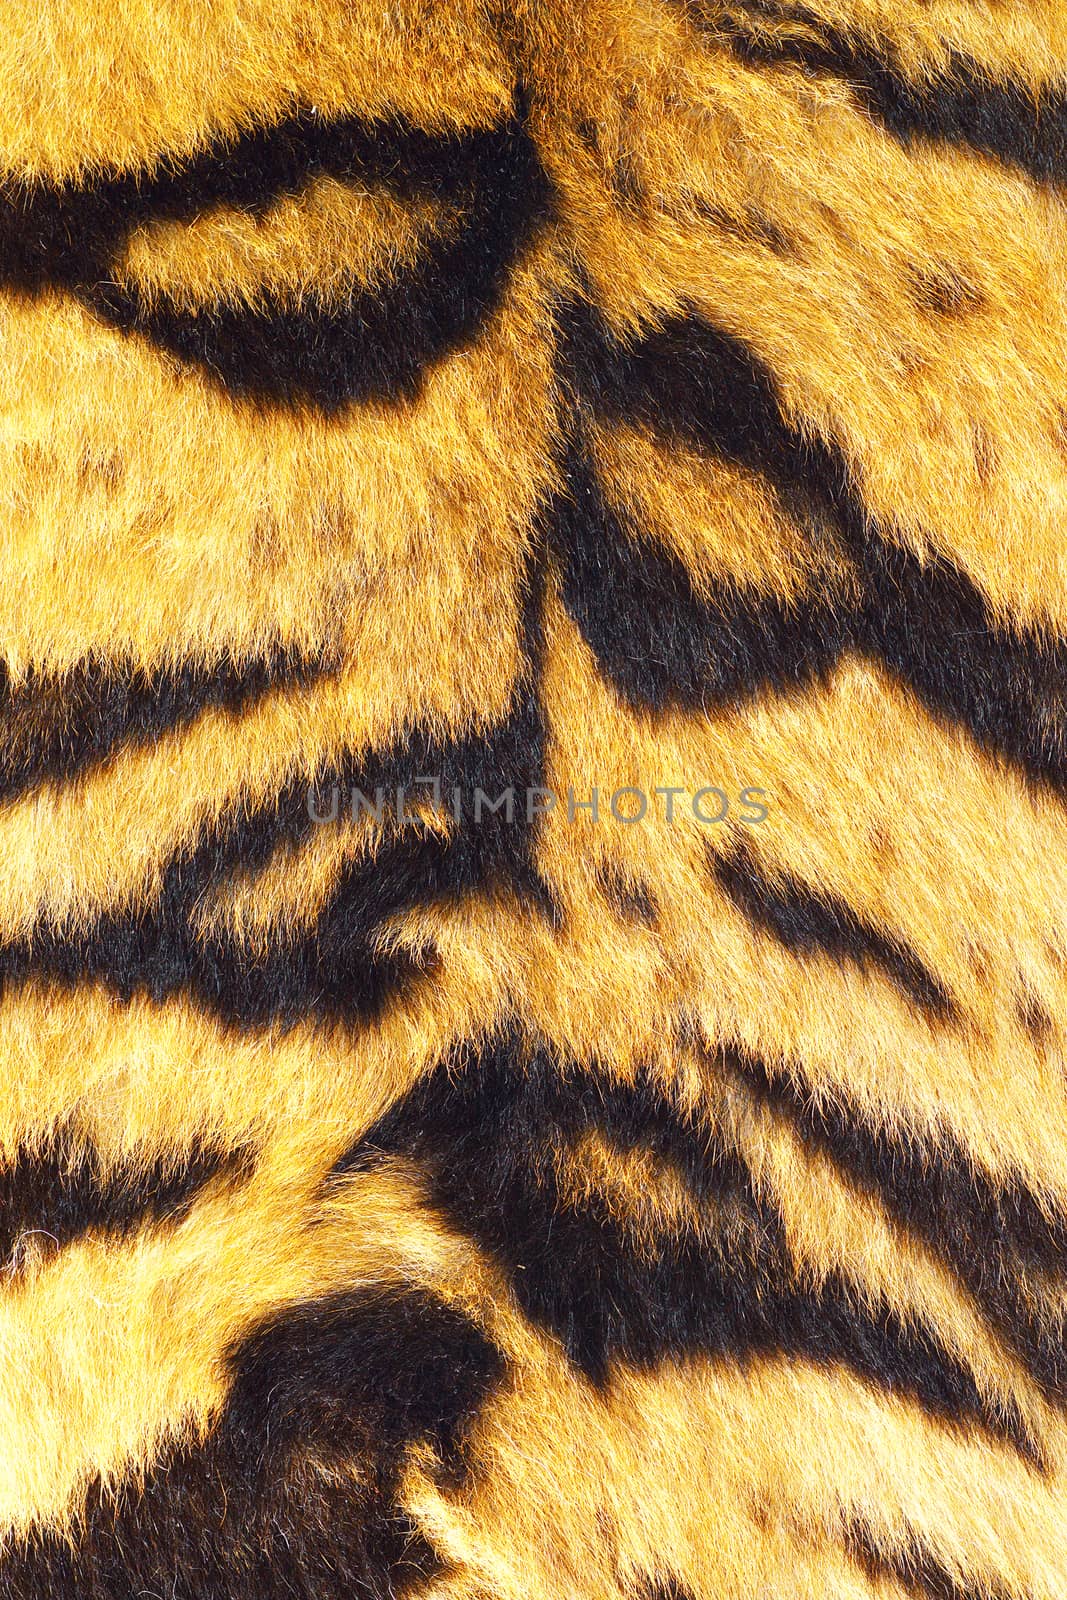 close up of tiger stripes on real fur by taviphoto